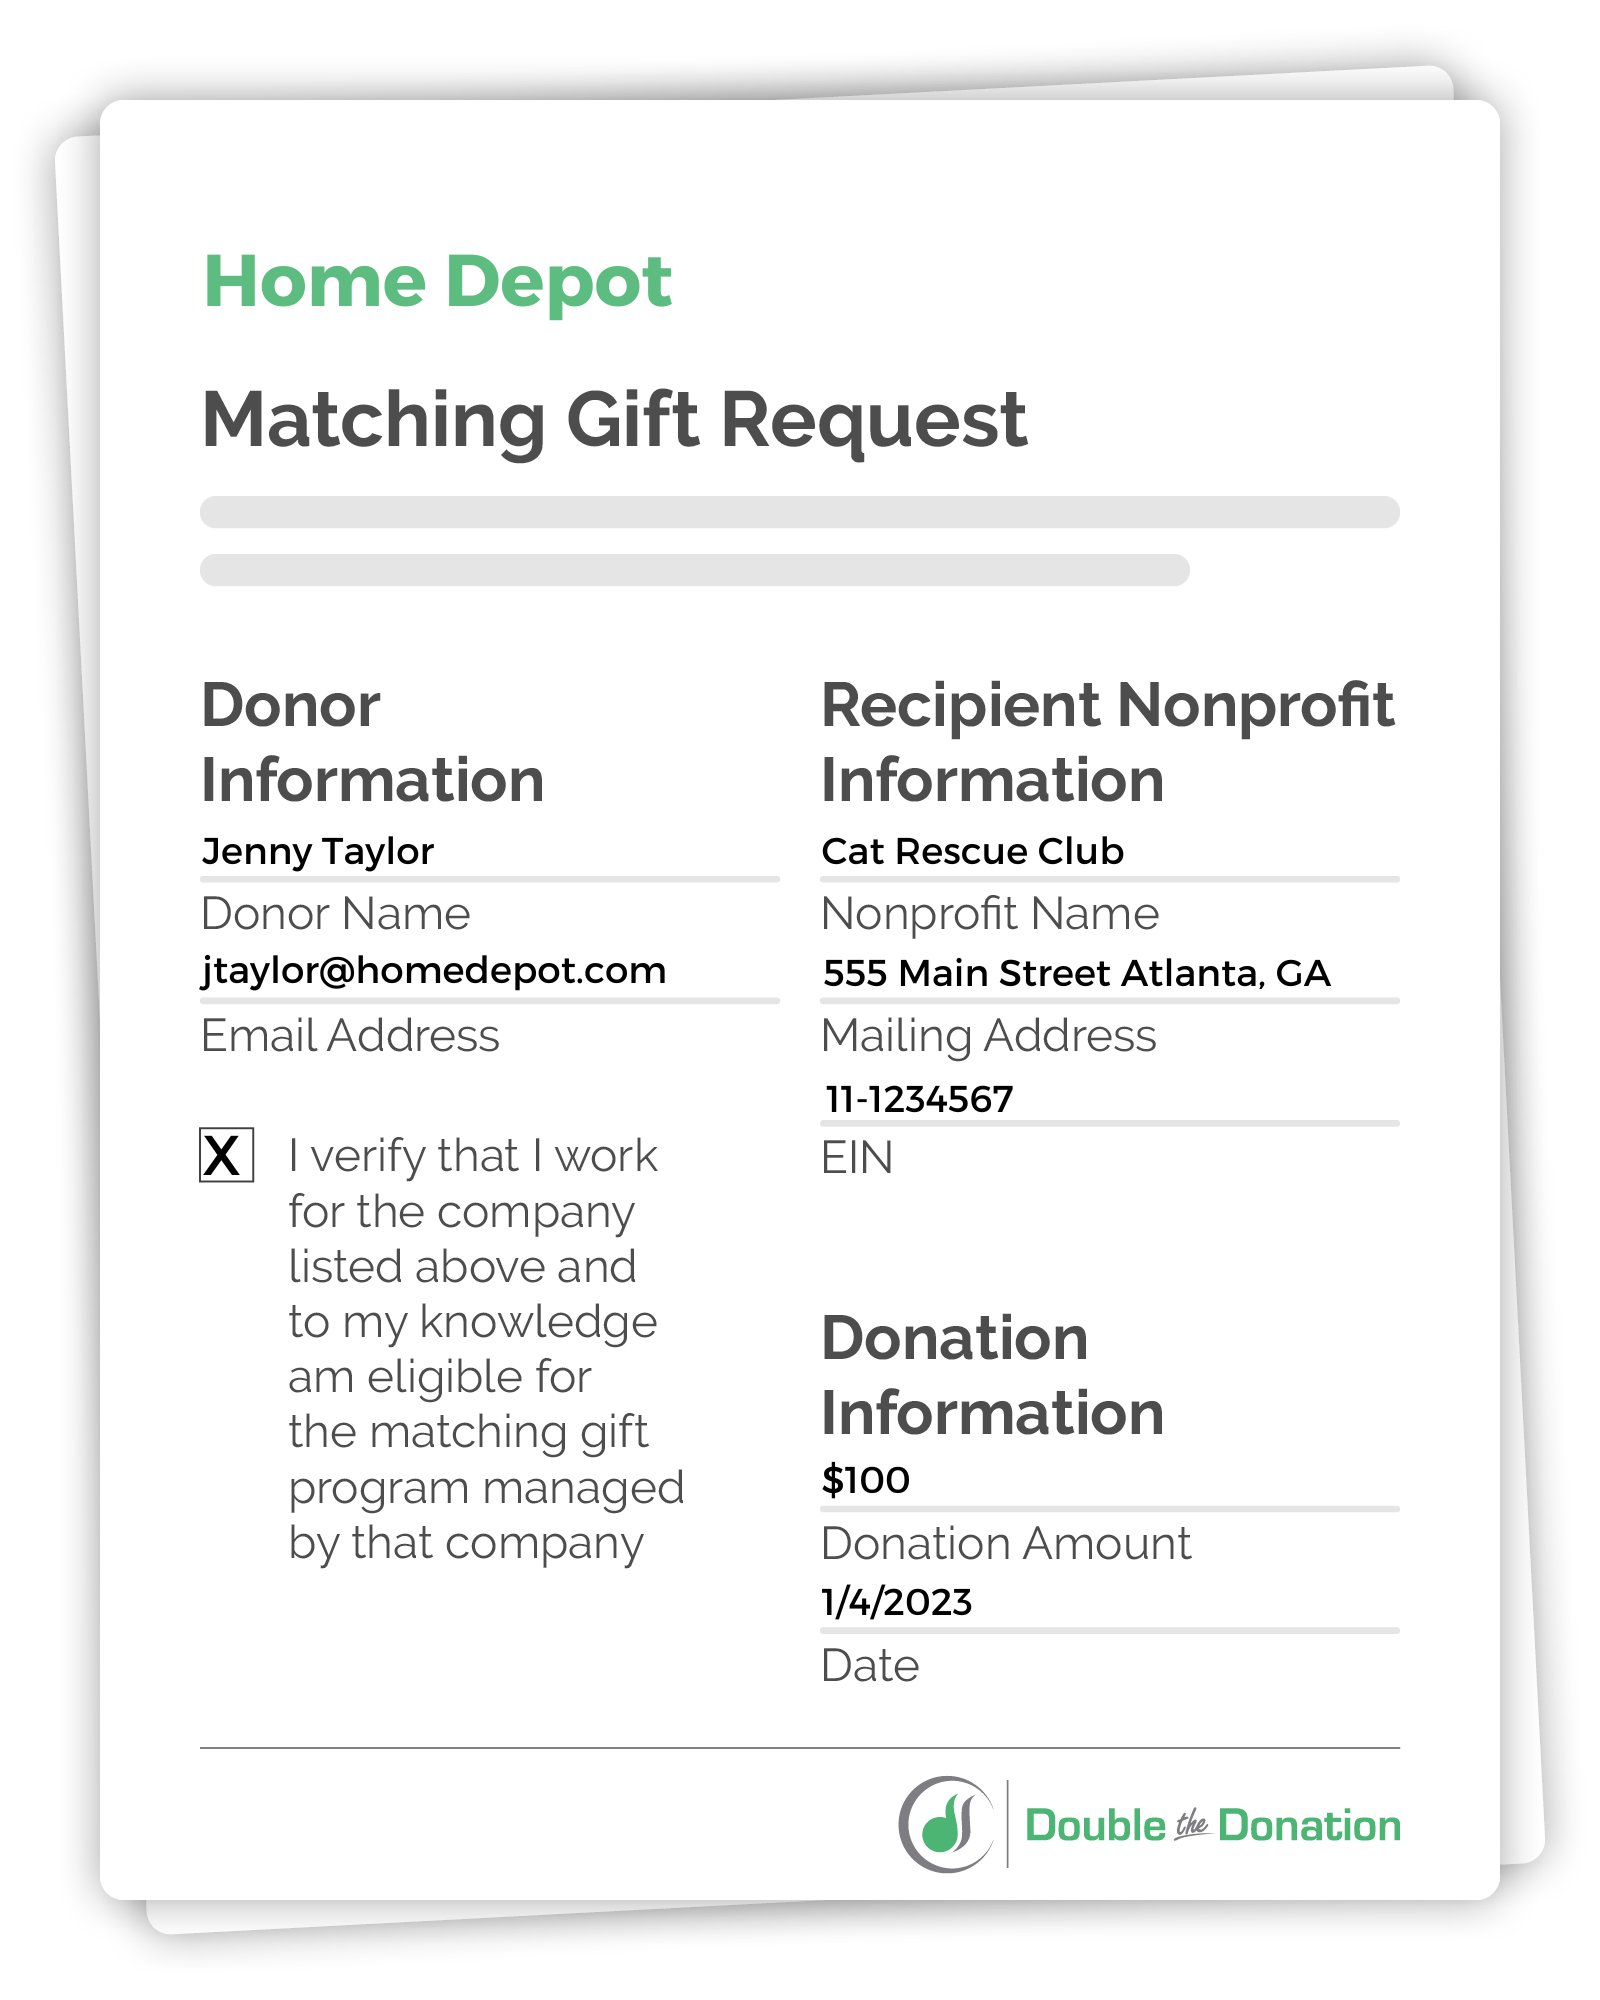 Double the Donation's standard matching gift form, completed